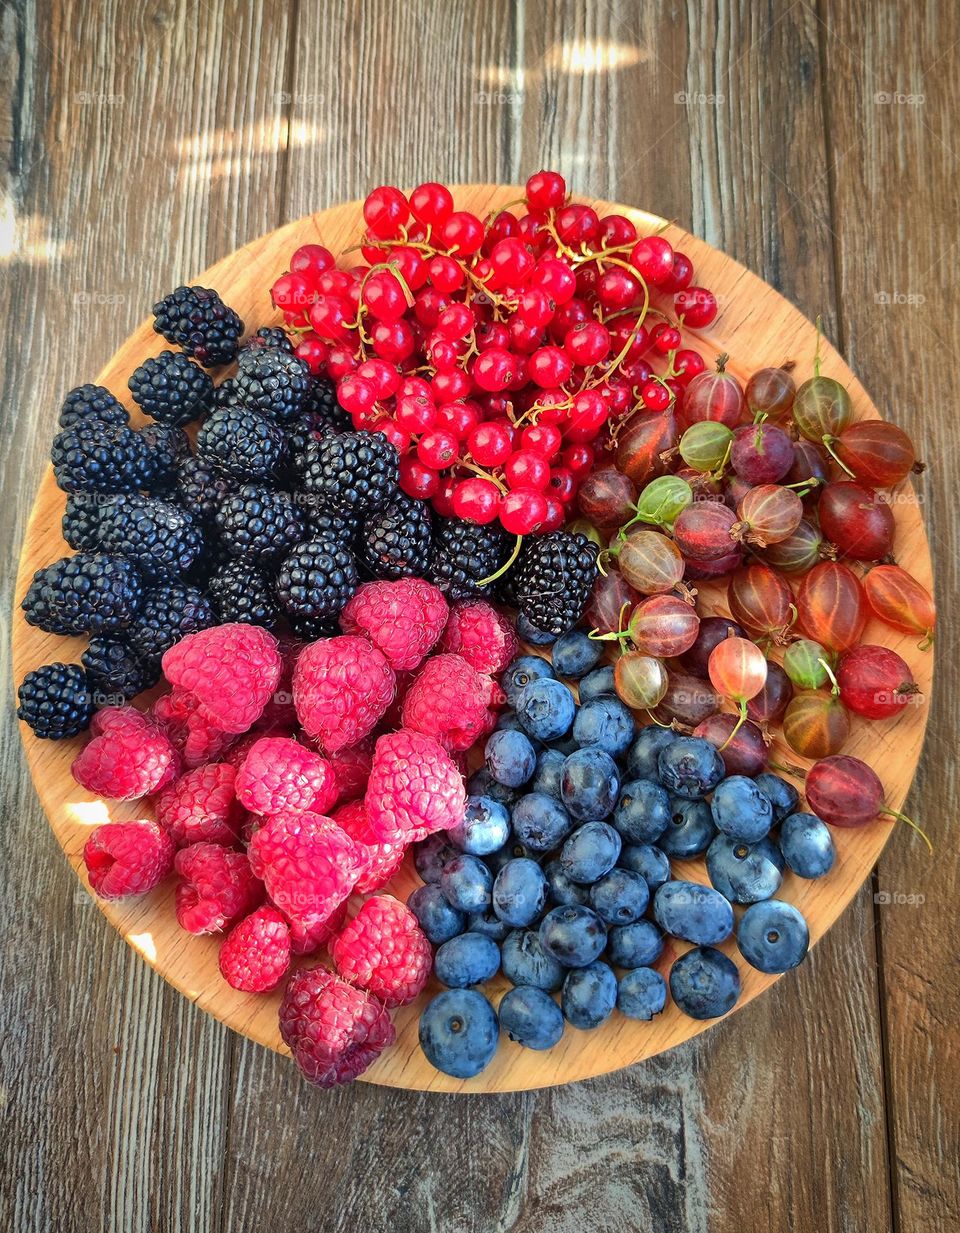 Triangles.Berries are laid out on a wooden plate in the form of triangles. Blackberry triangle, red currant triangle, brown gooseberry triangle, black blueberry triangle and red raspberry triangle